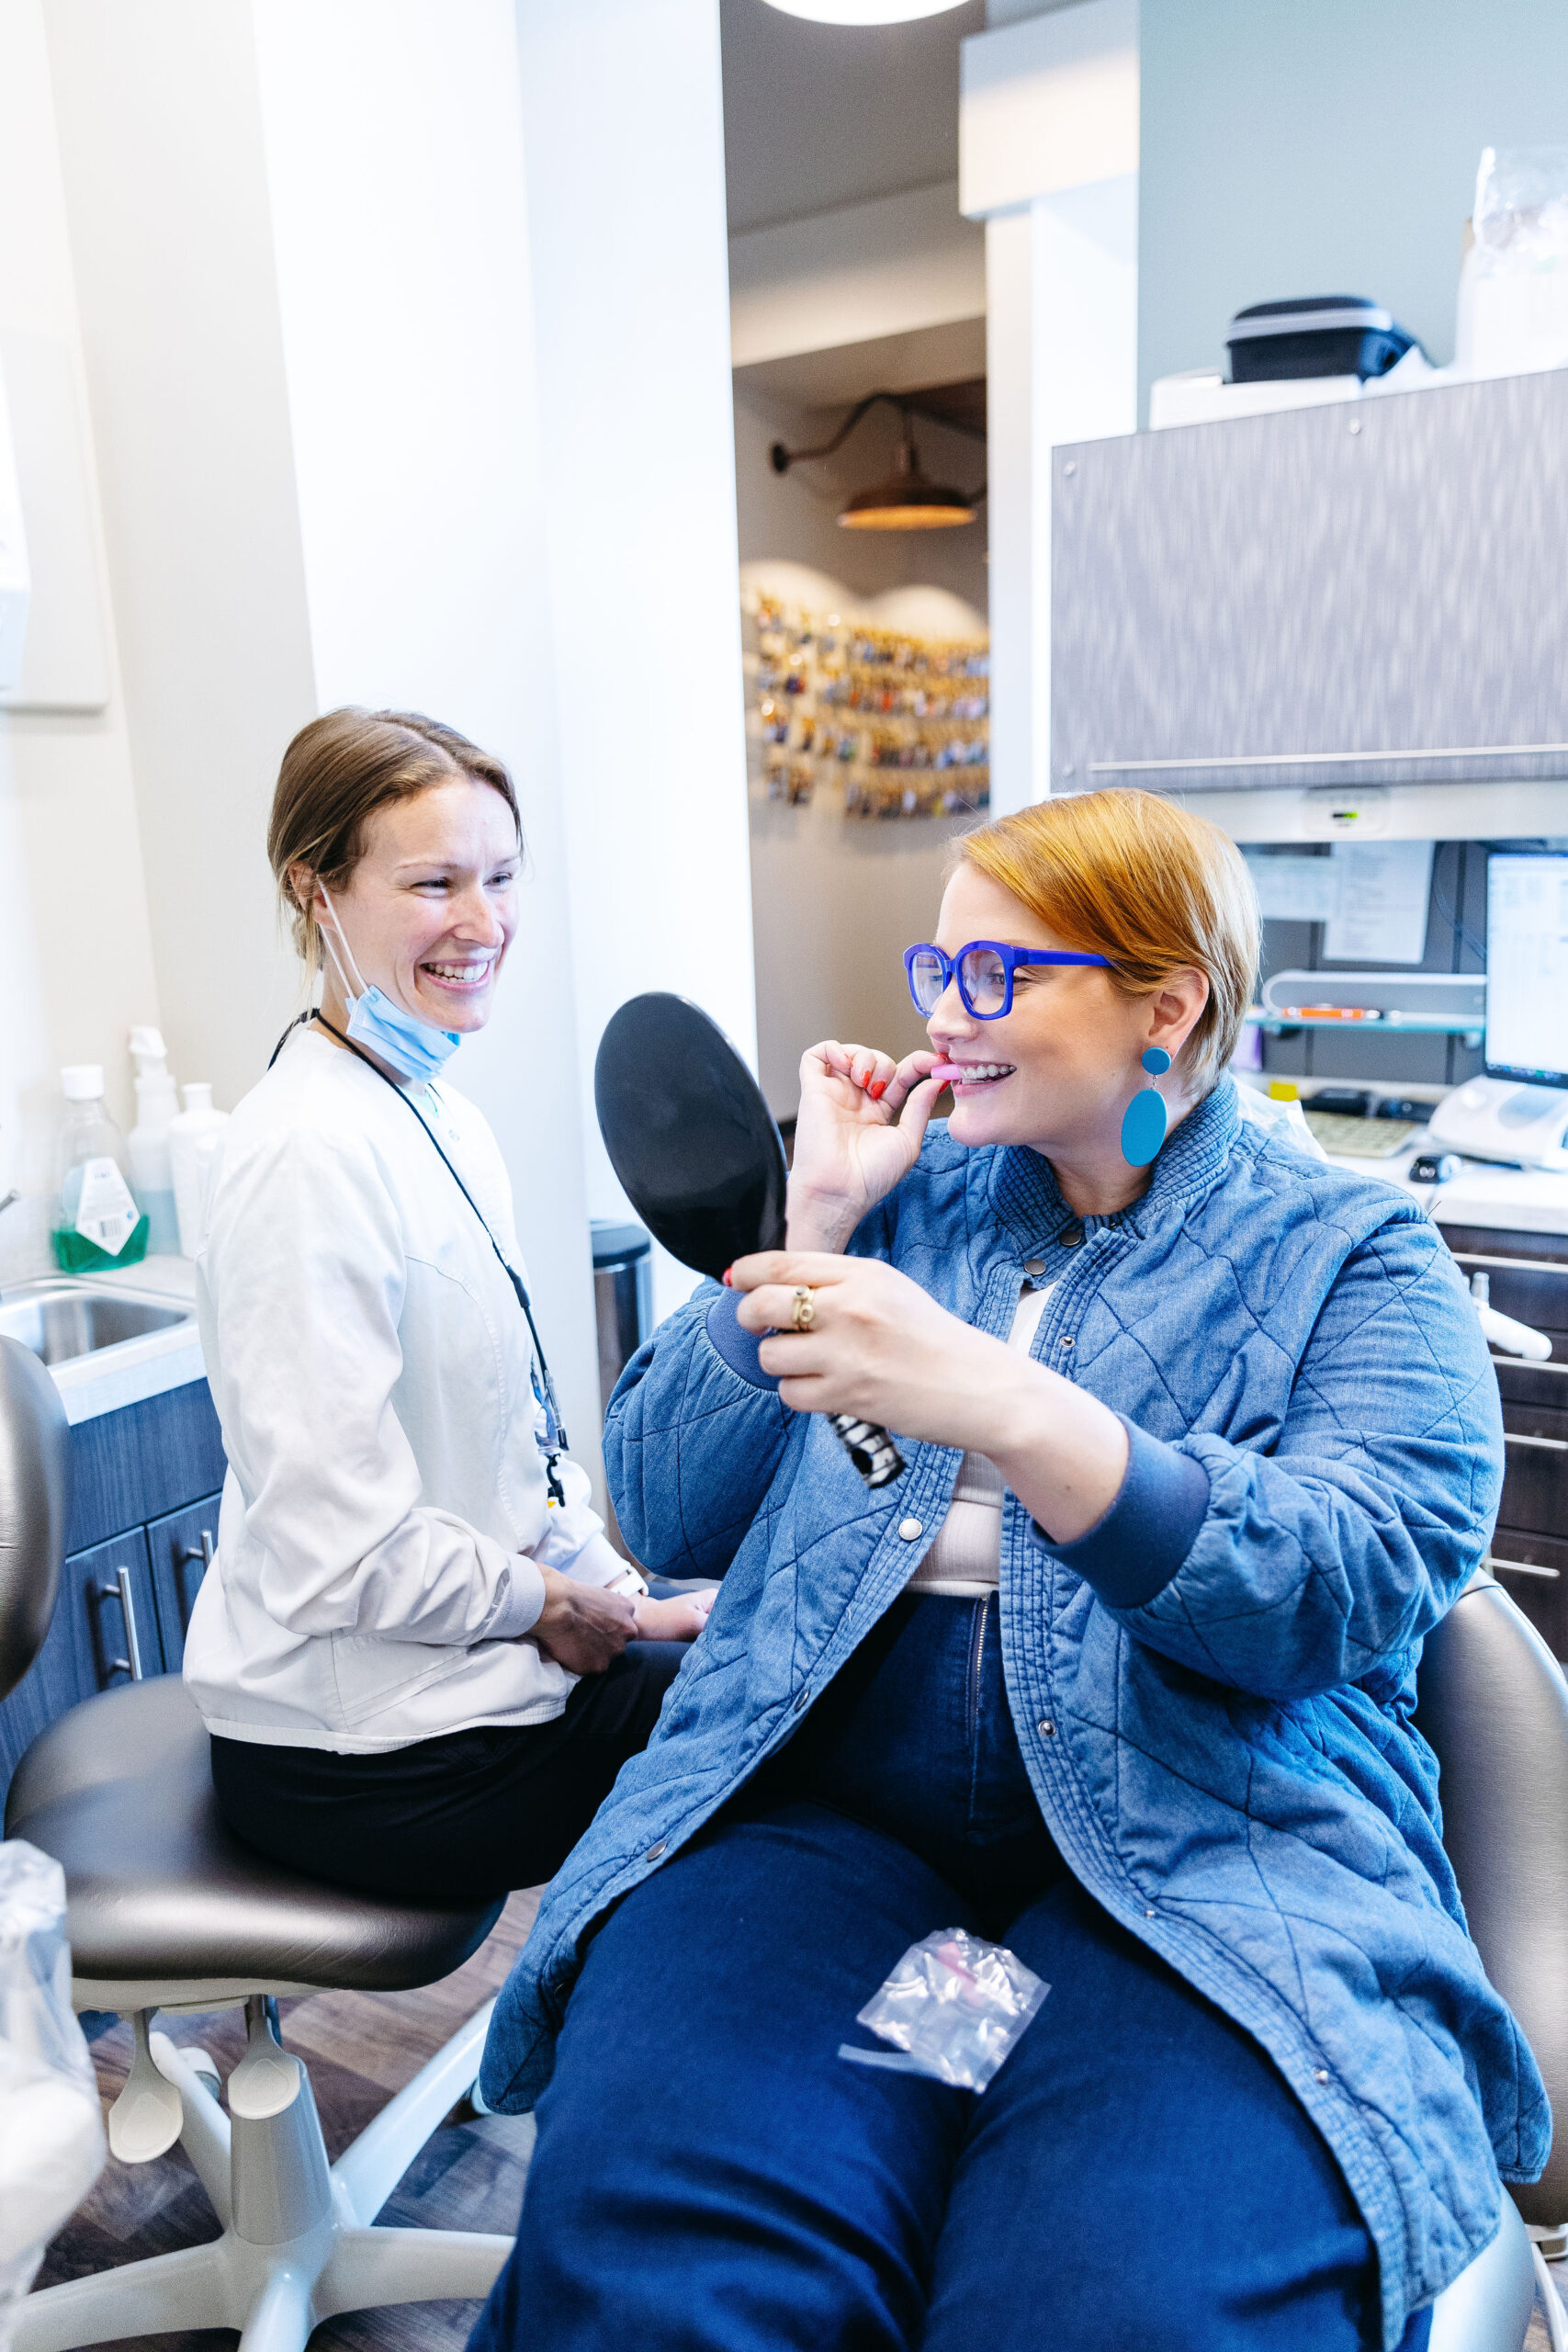 A dental assistant helping a patient with Invisalign, a cosmetic dentistry service